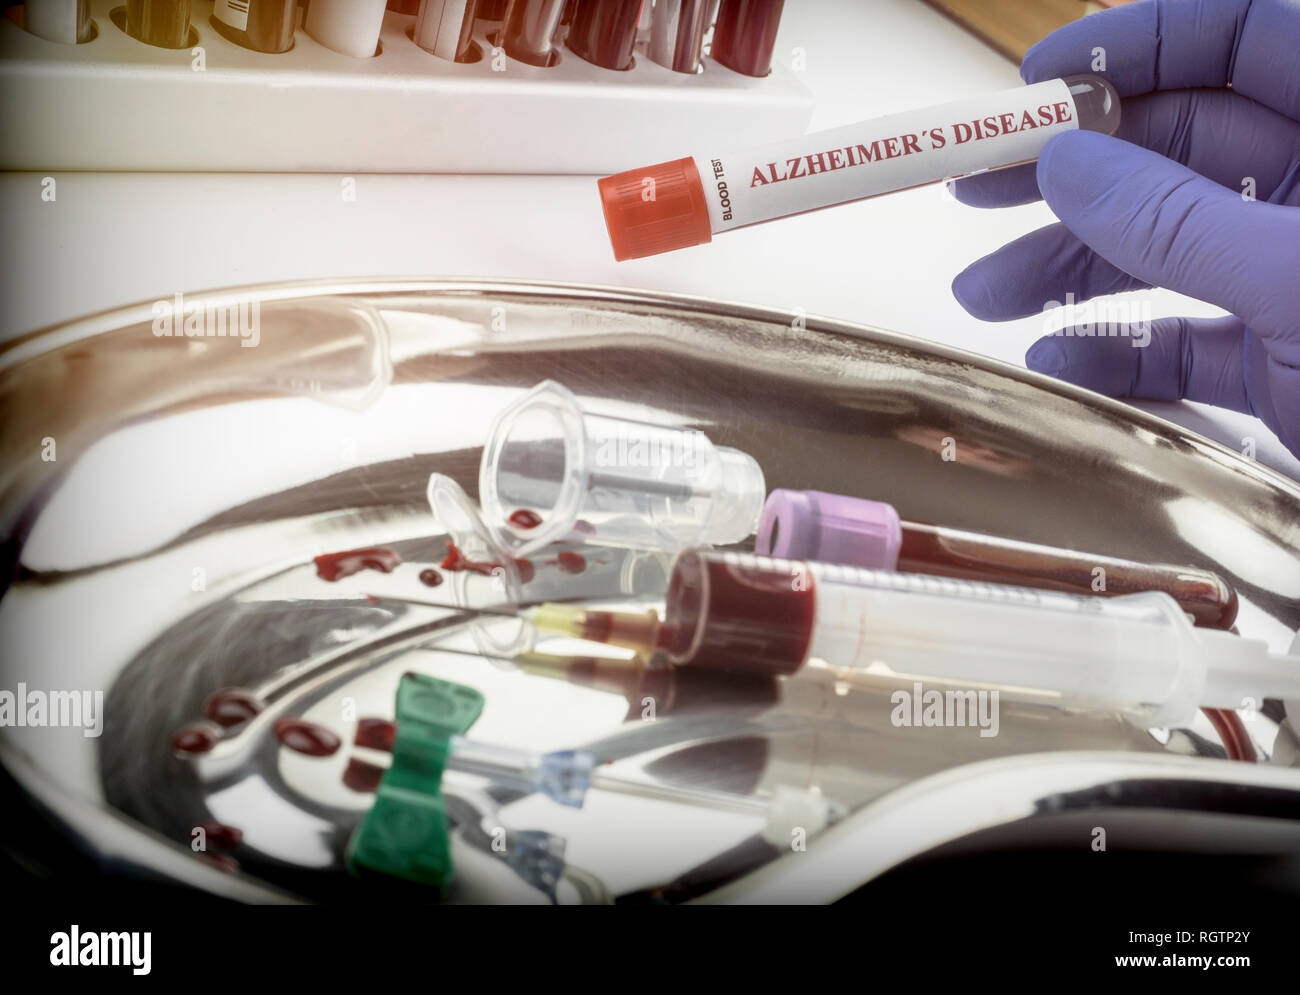 Scientist holds blood sample to investigate remedy against Alzheimer's disease, conceptual image Stock Photo